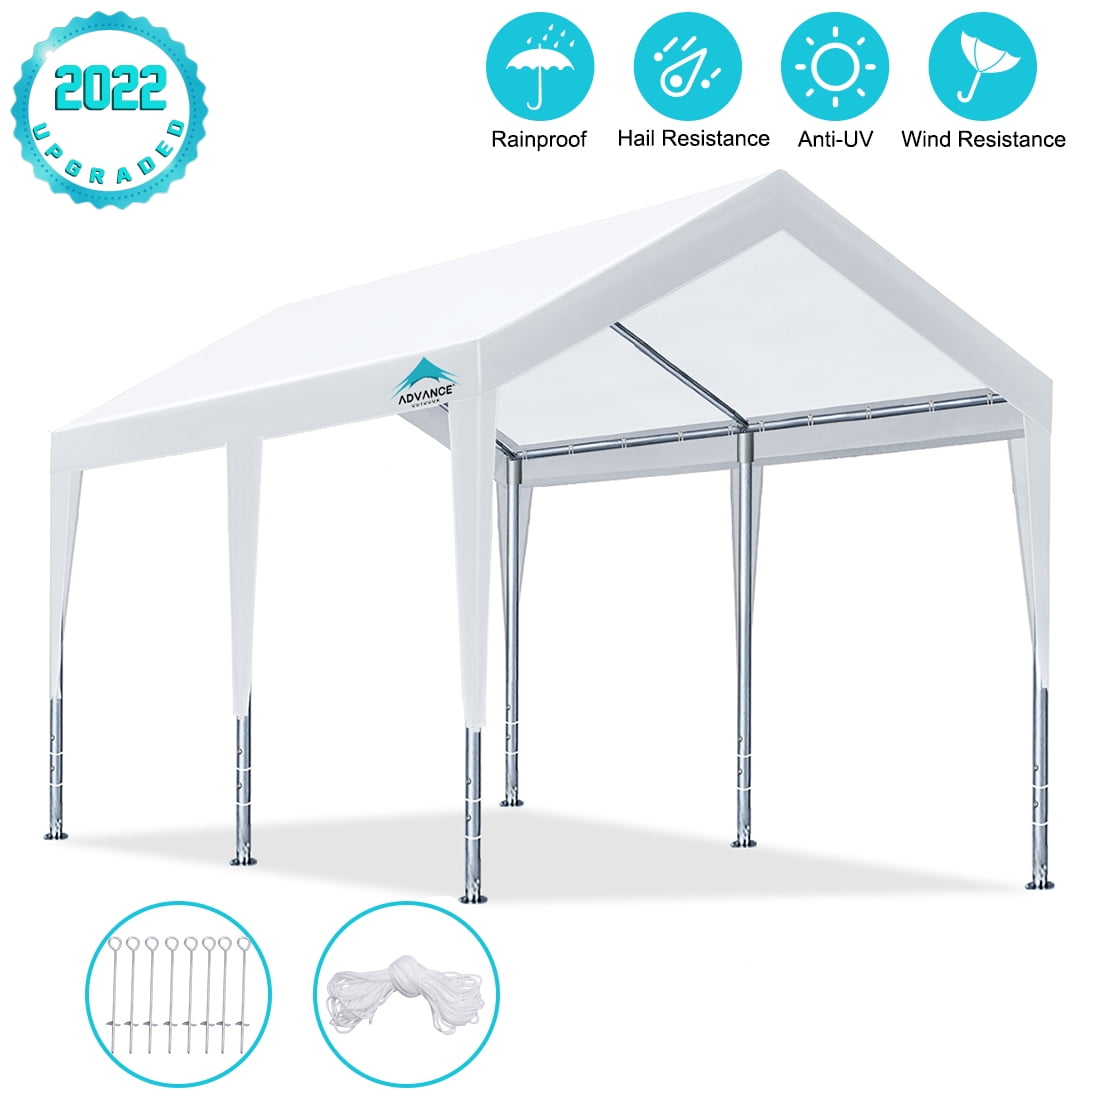 Adjustable Height from 6.5ft to 8.0ft ADVANCE OUTDOOR 10 x 20 FT Heavy Duty Carport Car Canopy Garage Shelter Party Tent White 